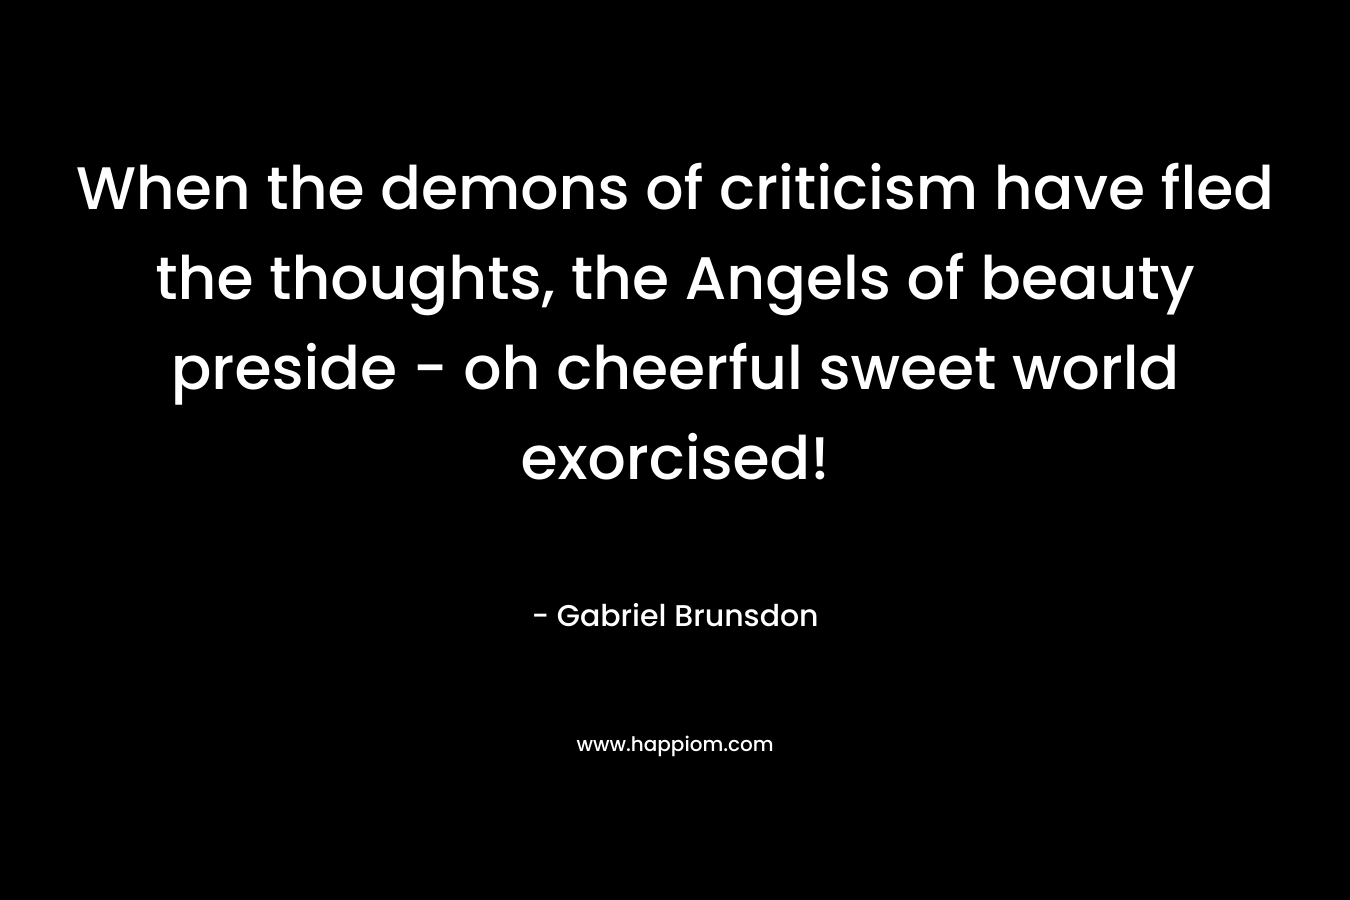 When the demons of criticism have fled the thoughts, the Angels of beauty preside – oh cheerful sweet world exorcised! – Gabriel Brunsdon